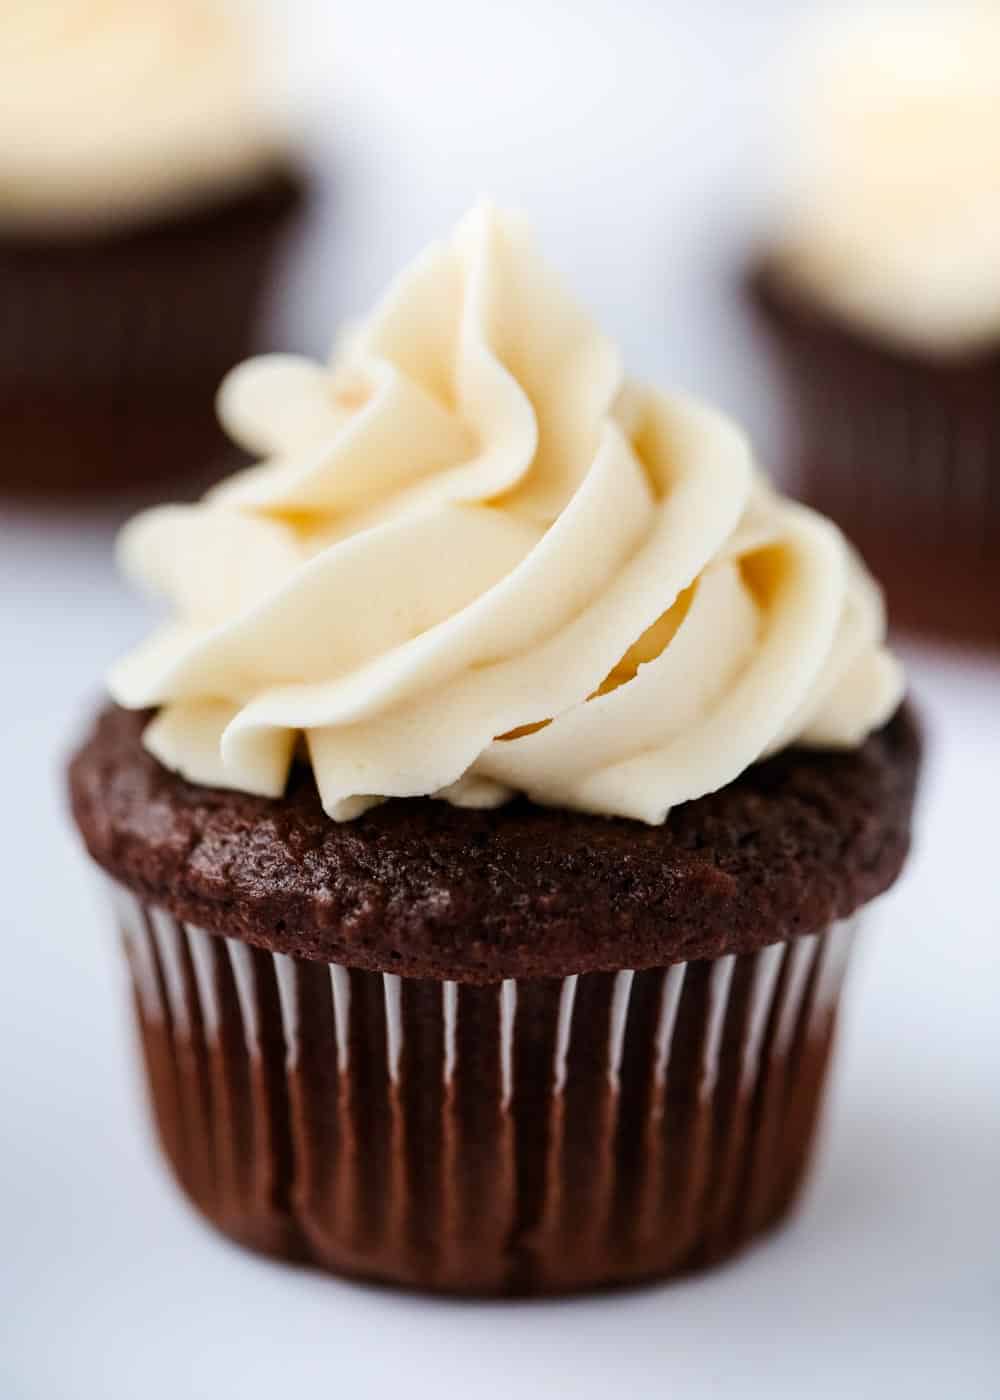 Perfectly frosted chocolate cupcake with buttercream frosting.